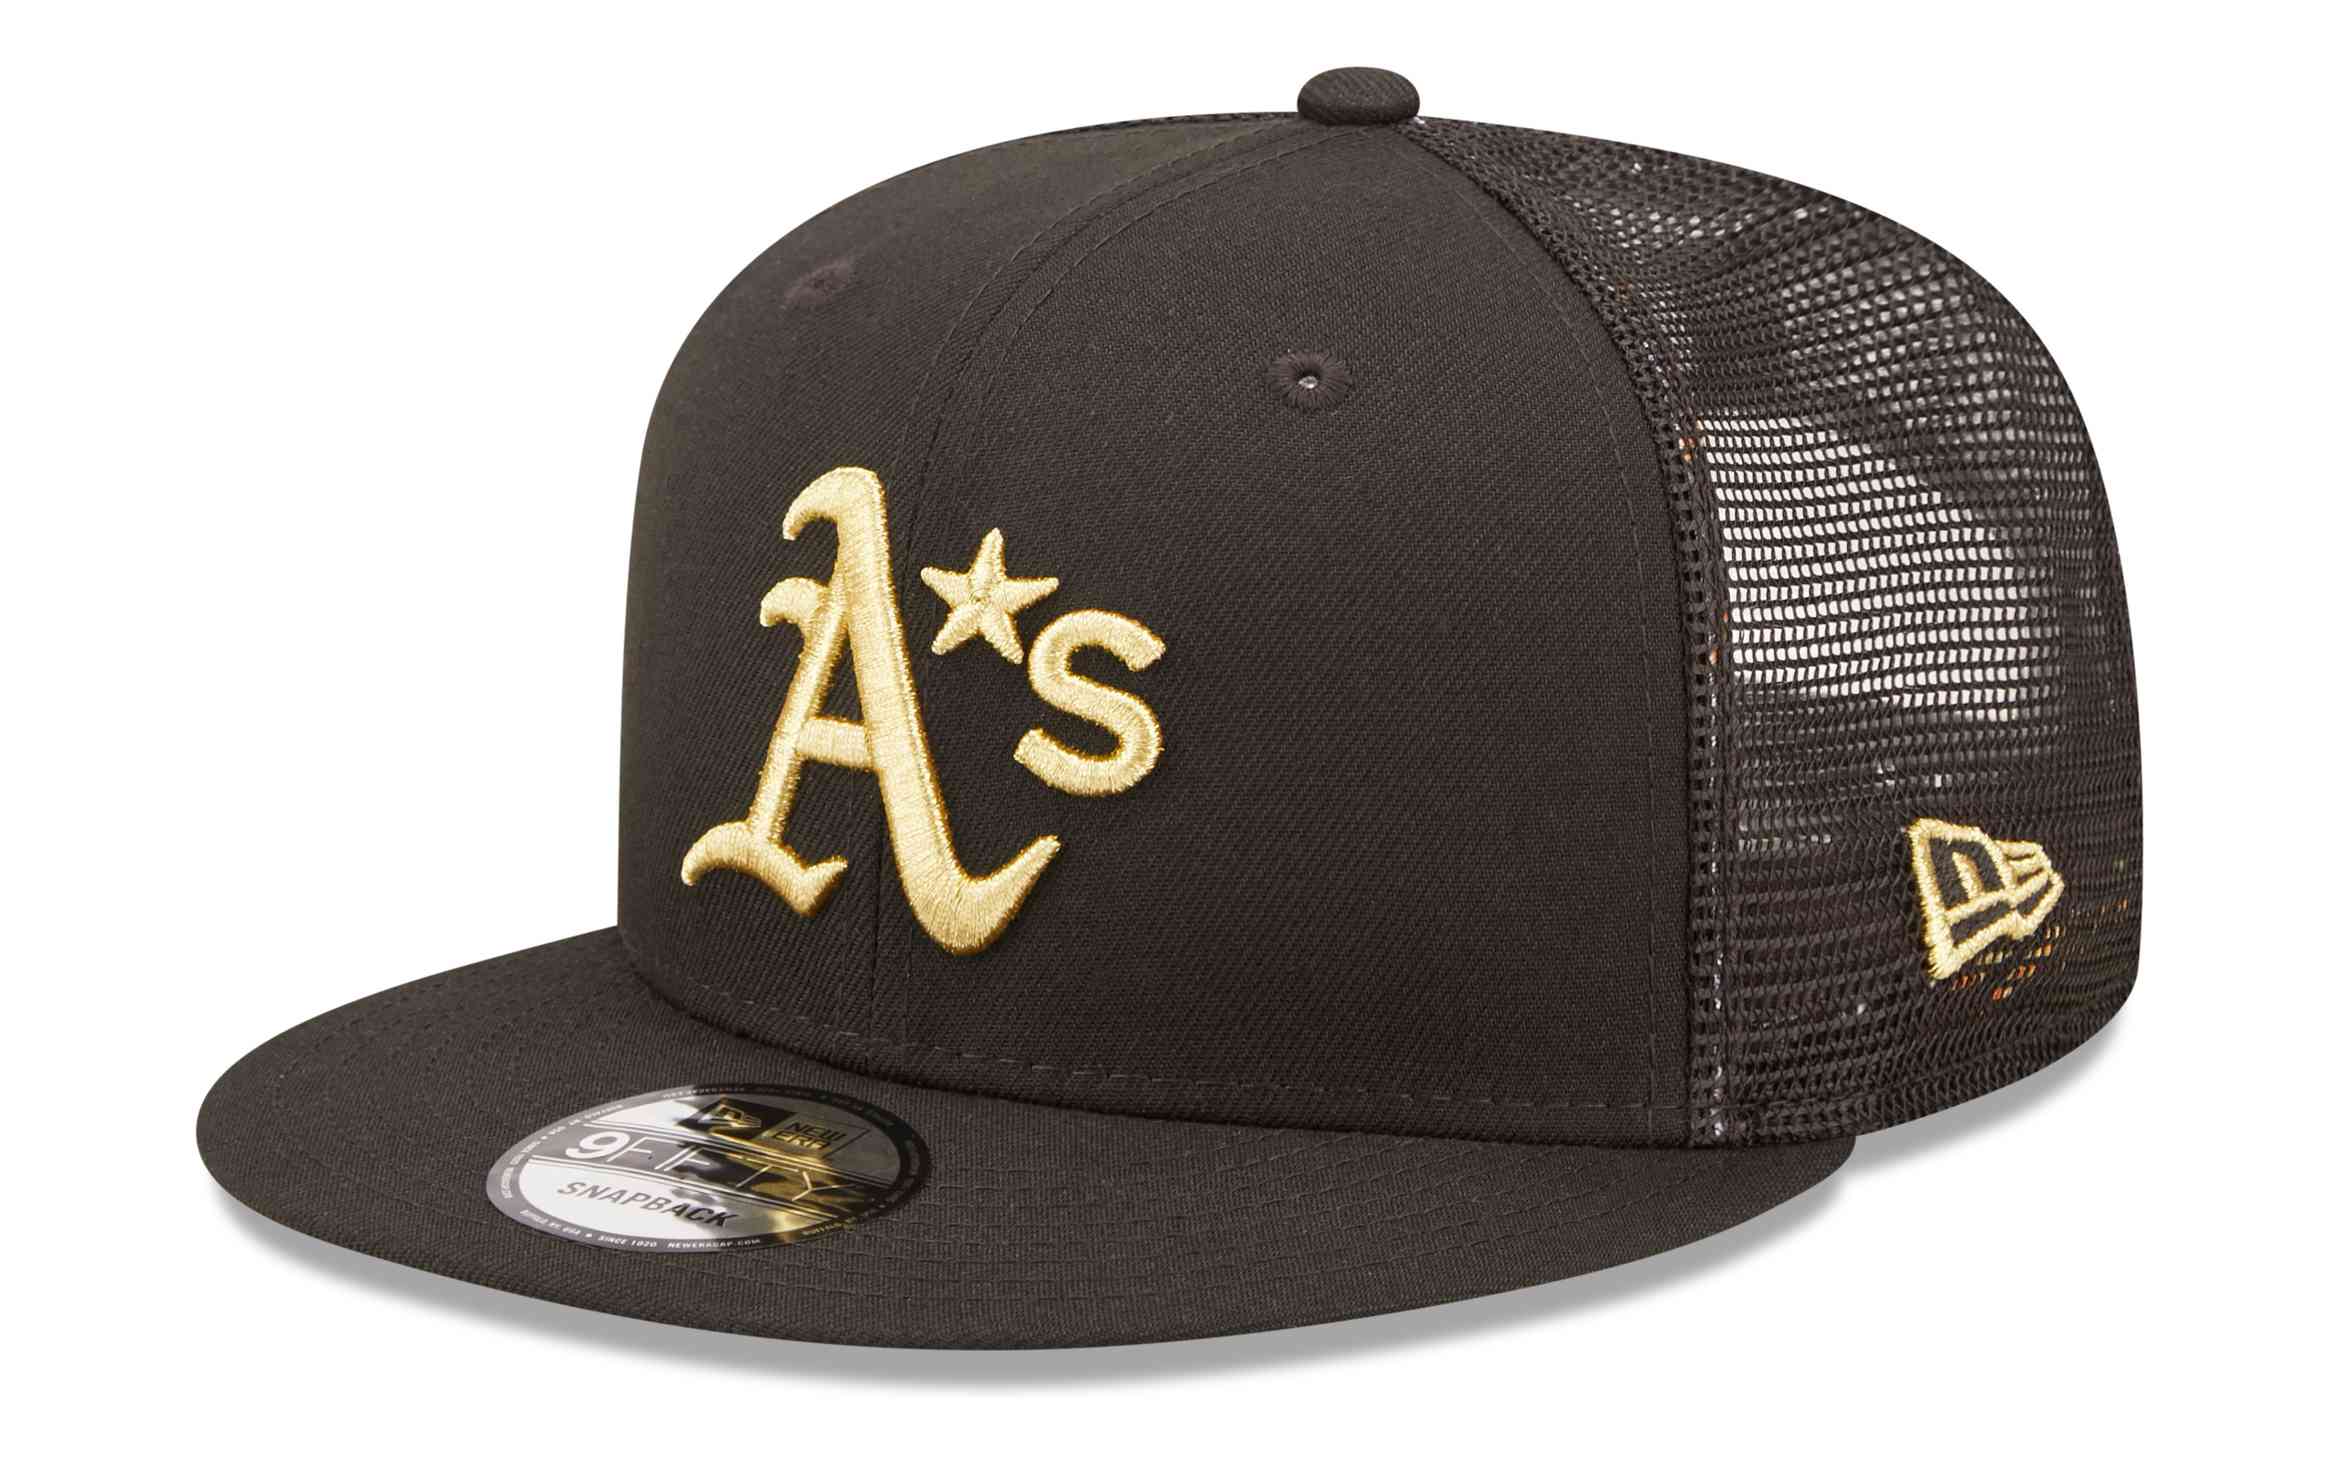 New Era - MLB Oakland Athletics All Star Game Patch 9Fifty